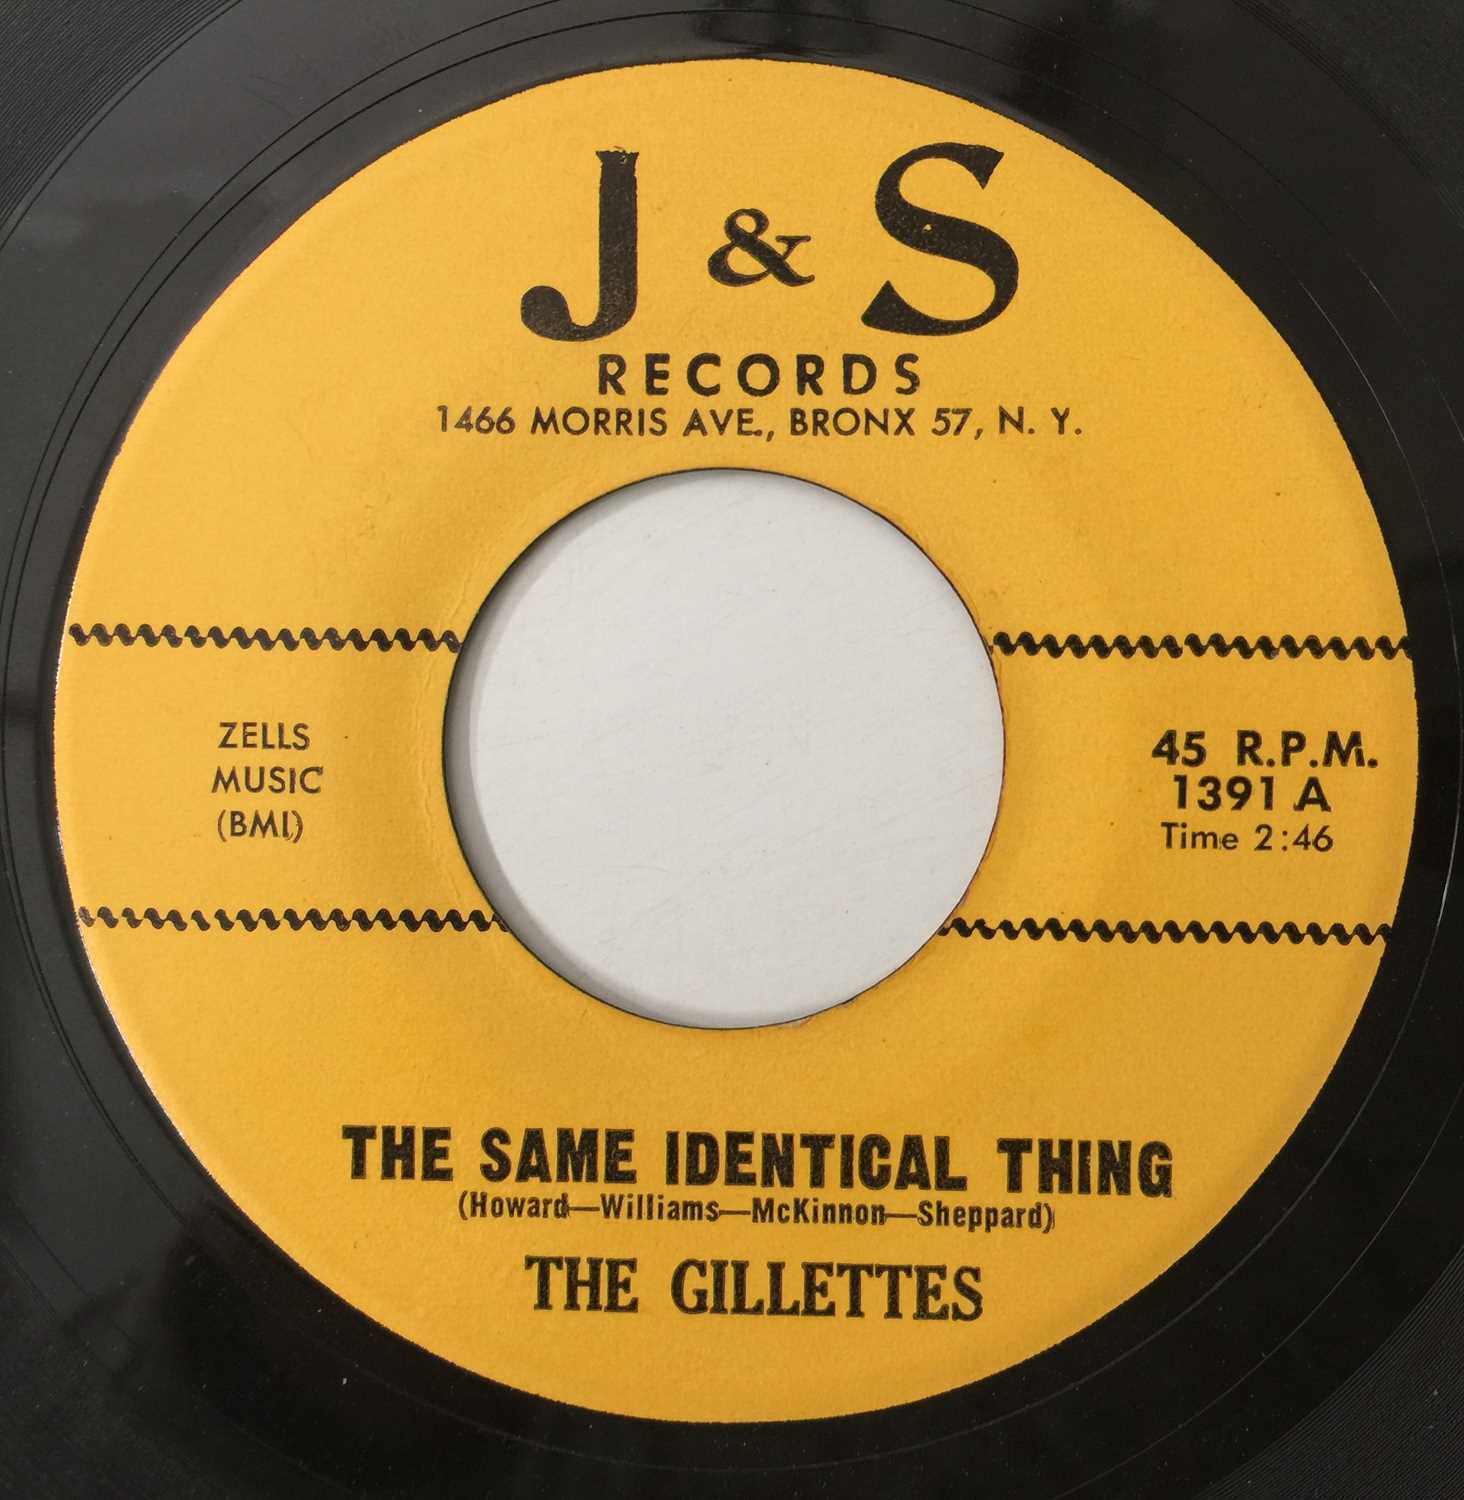 Lot 20 - THE GILLETTES - THE SAME IDENTICAL THING/ 24 HOURS OF THE DAY 7" (US NORTHERN - J&S RECORDS - 1391)